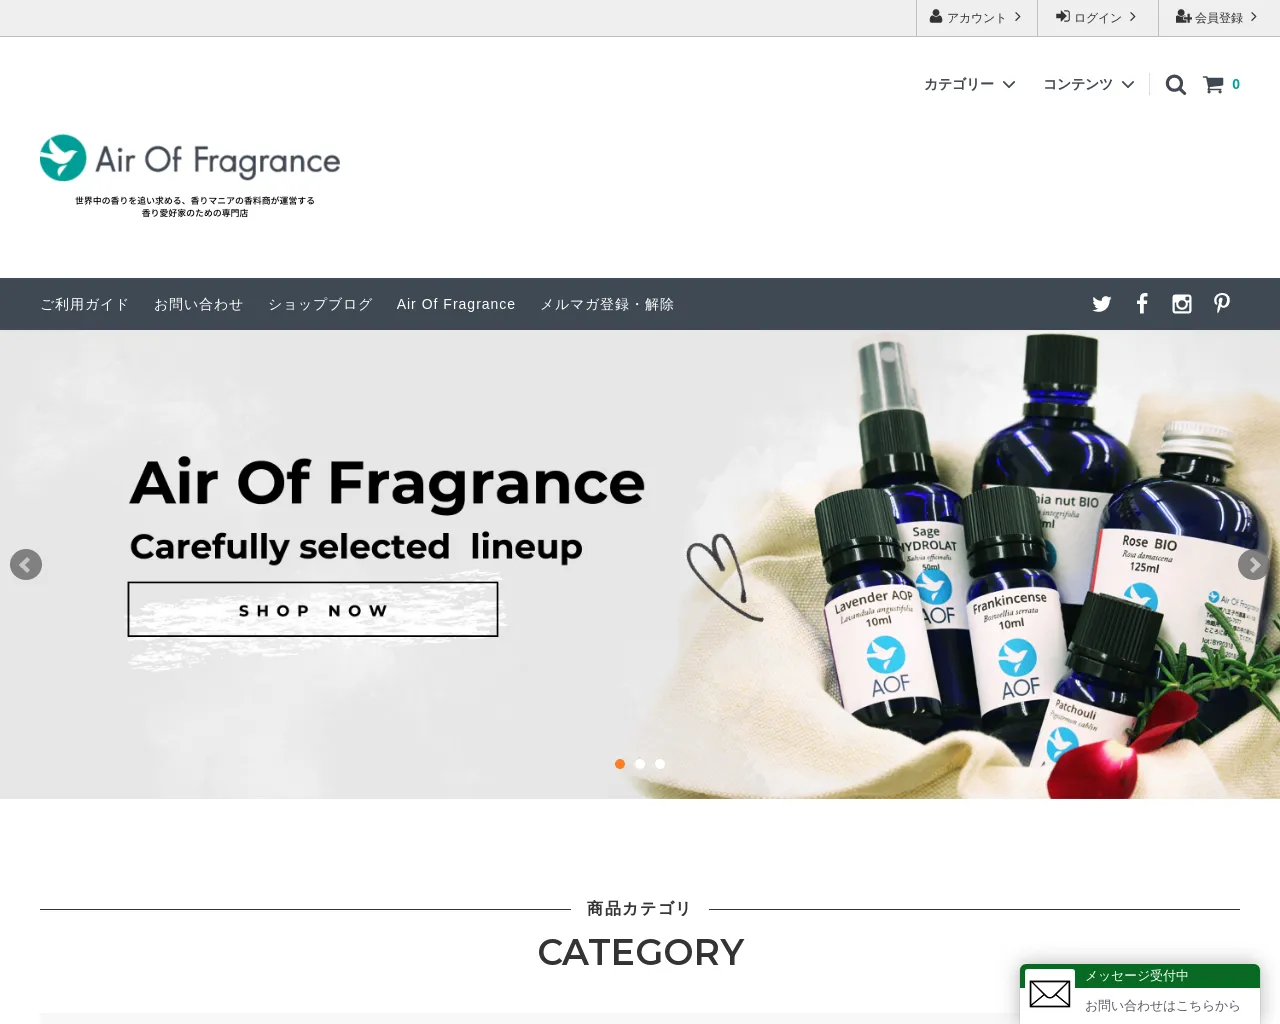 Air Of Fragrance site